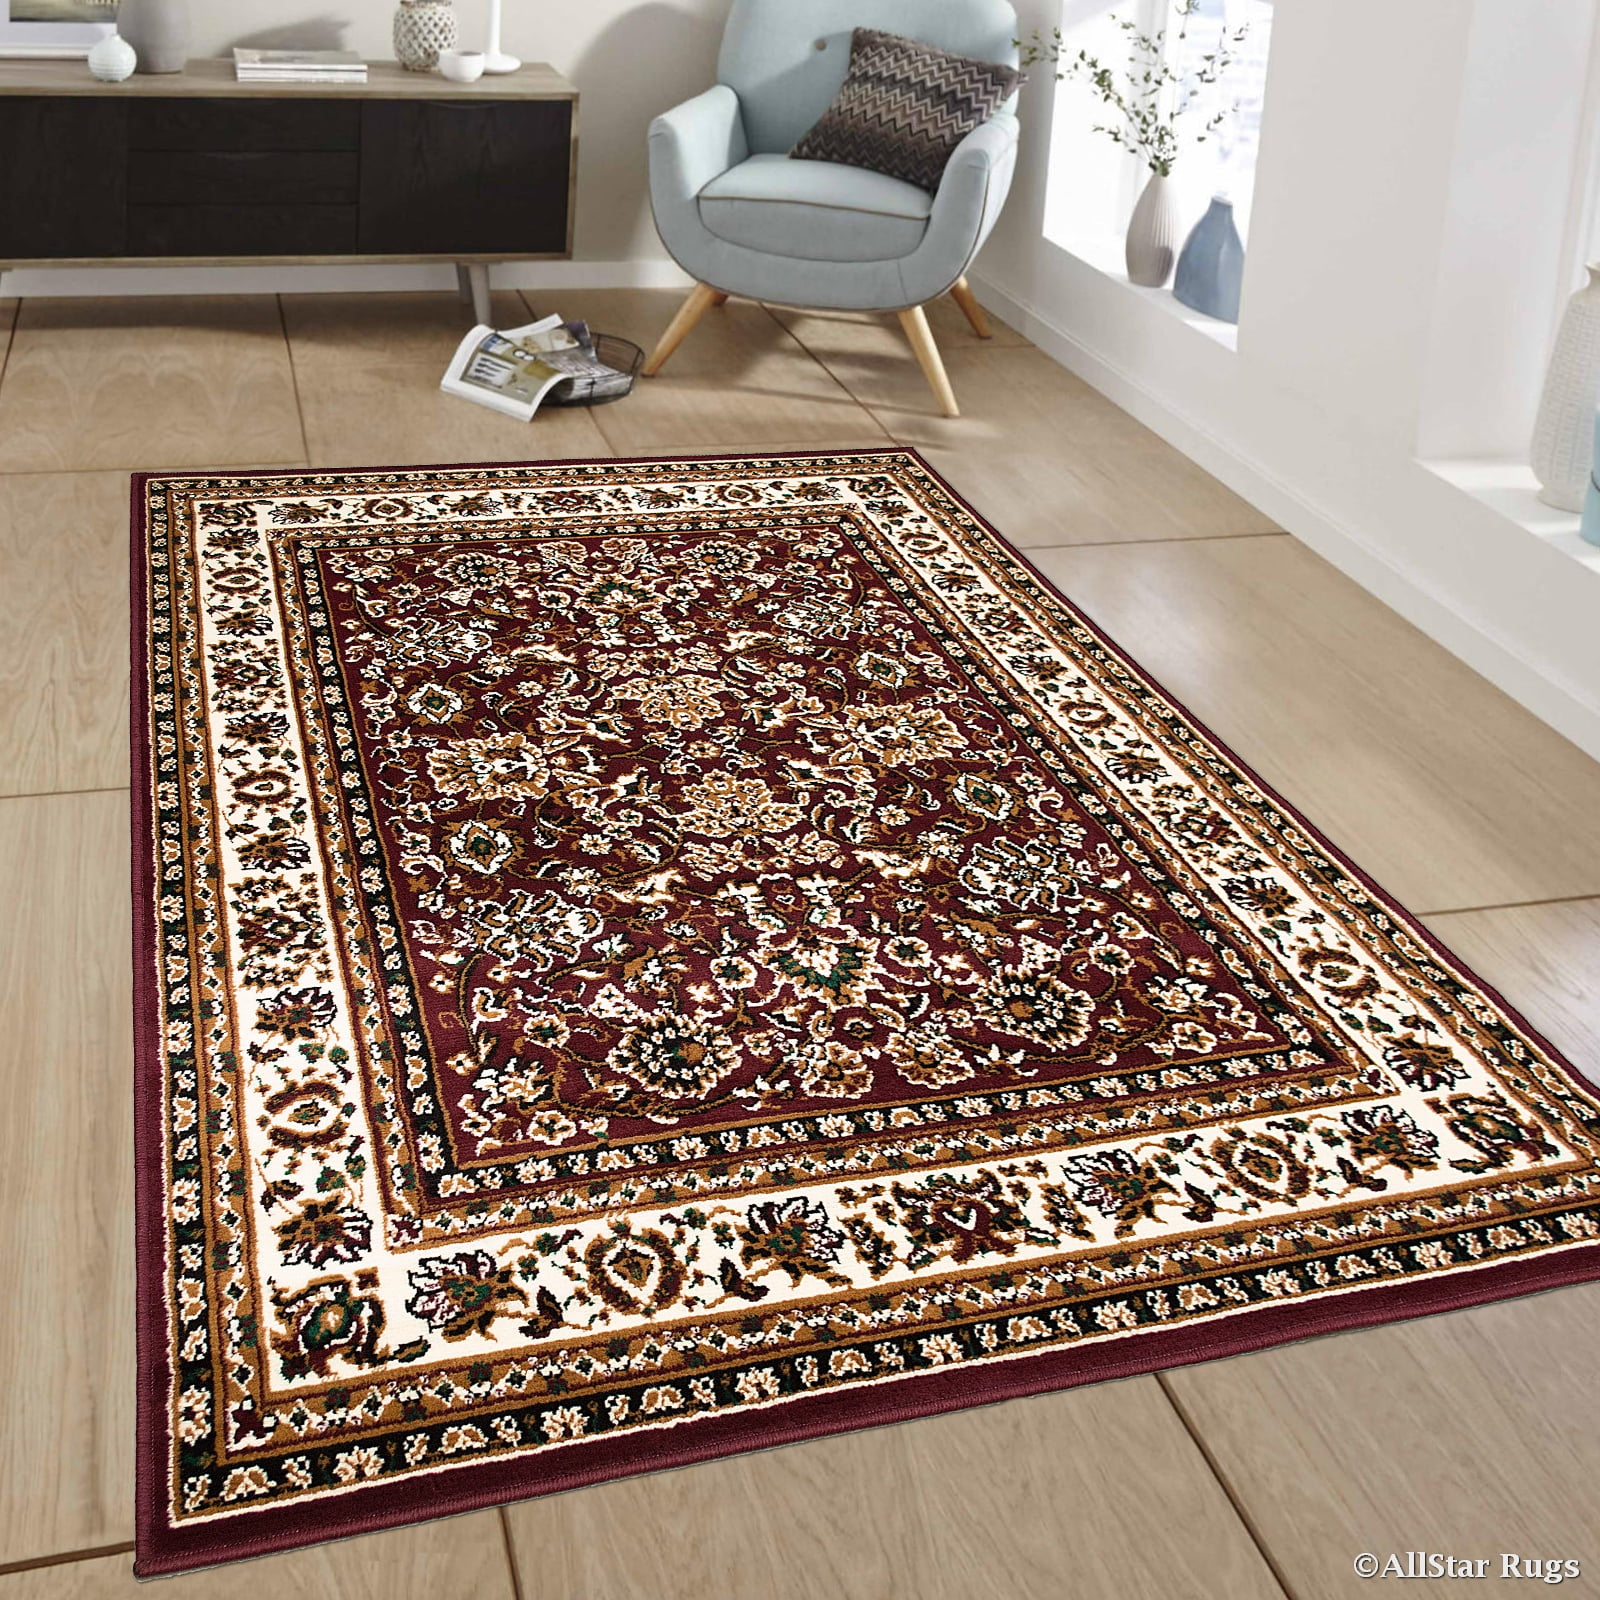 Allstar Burdy Woven High Quality Rug, What Are High Quality Rugs Made Of